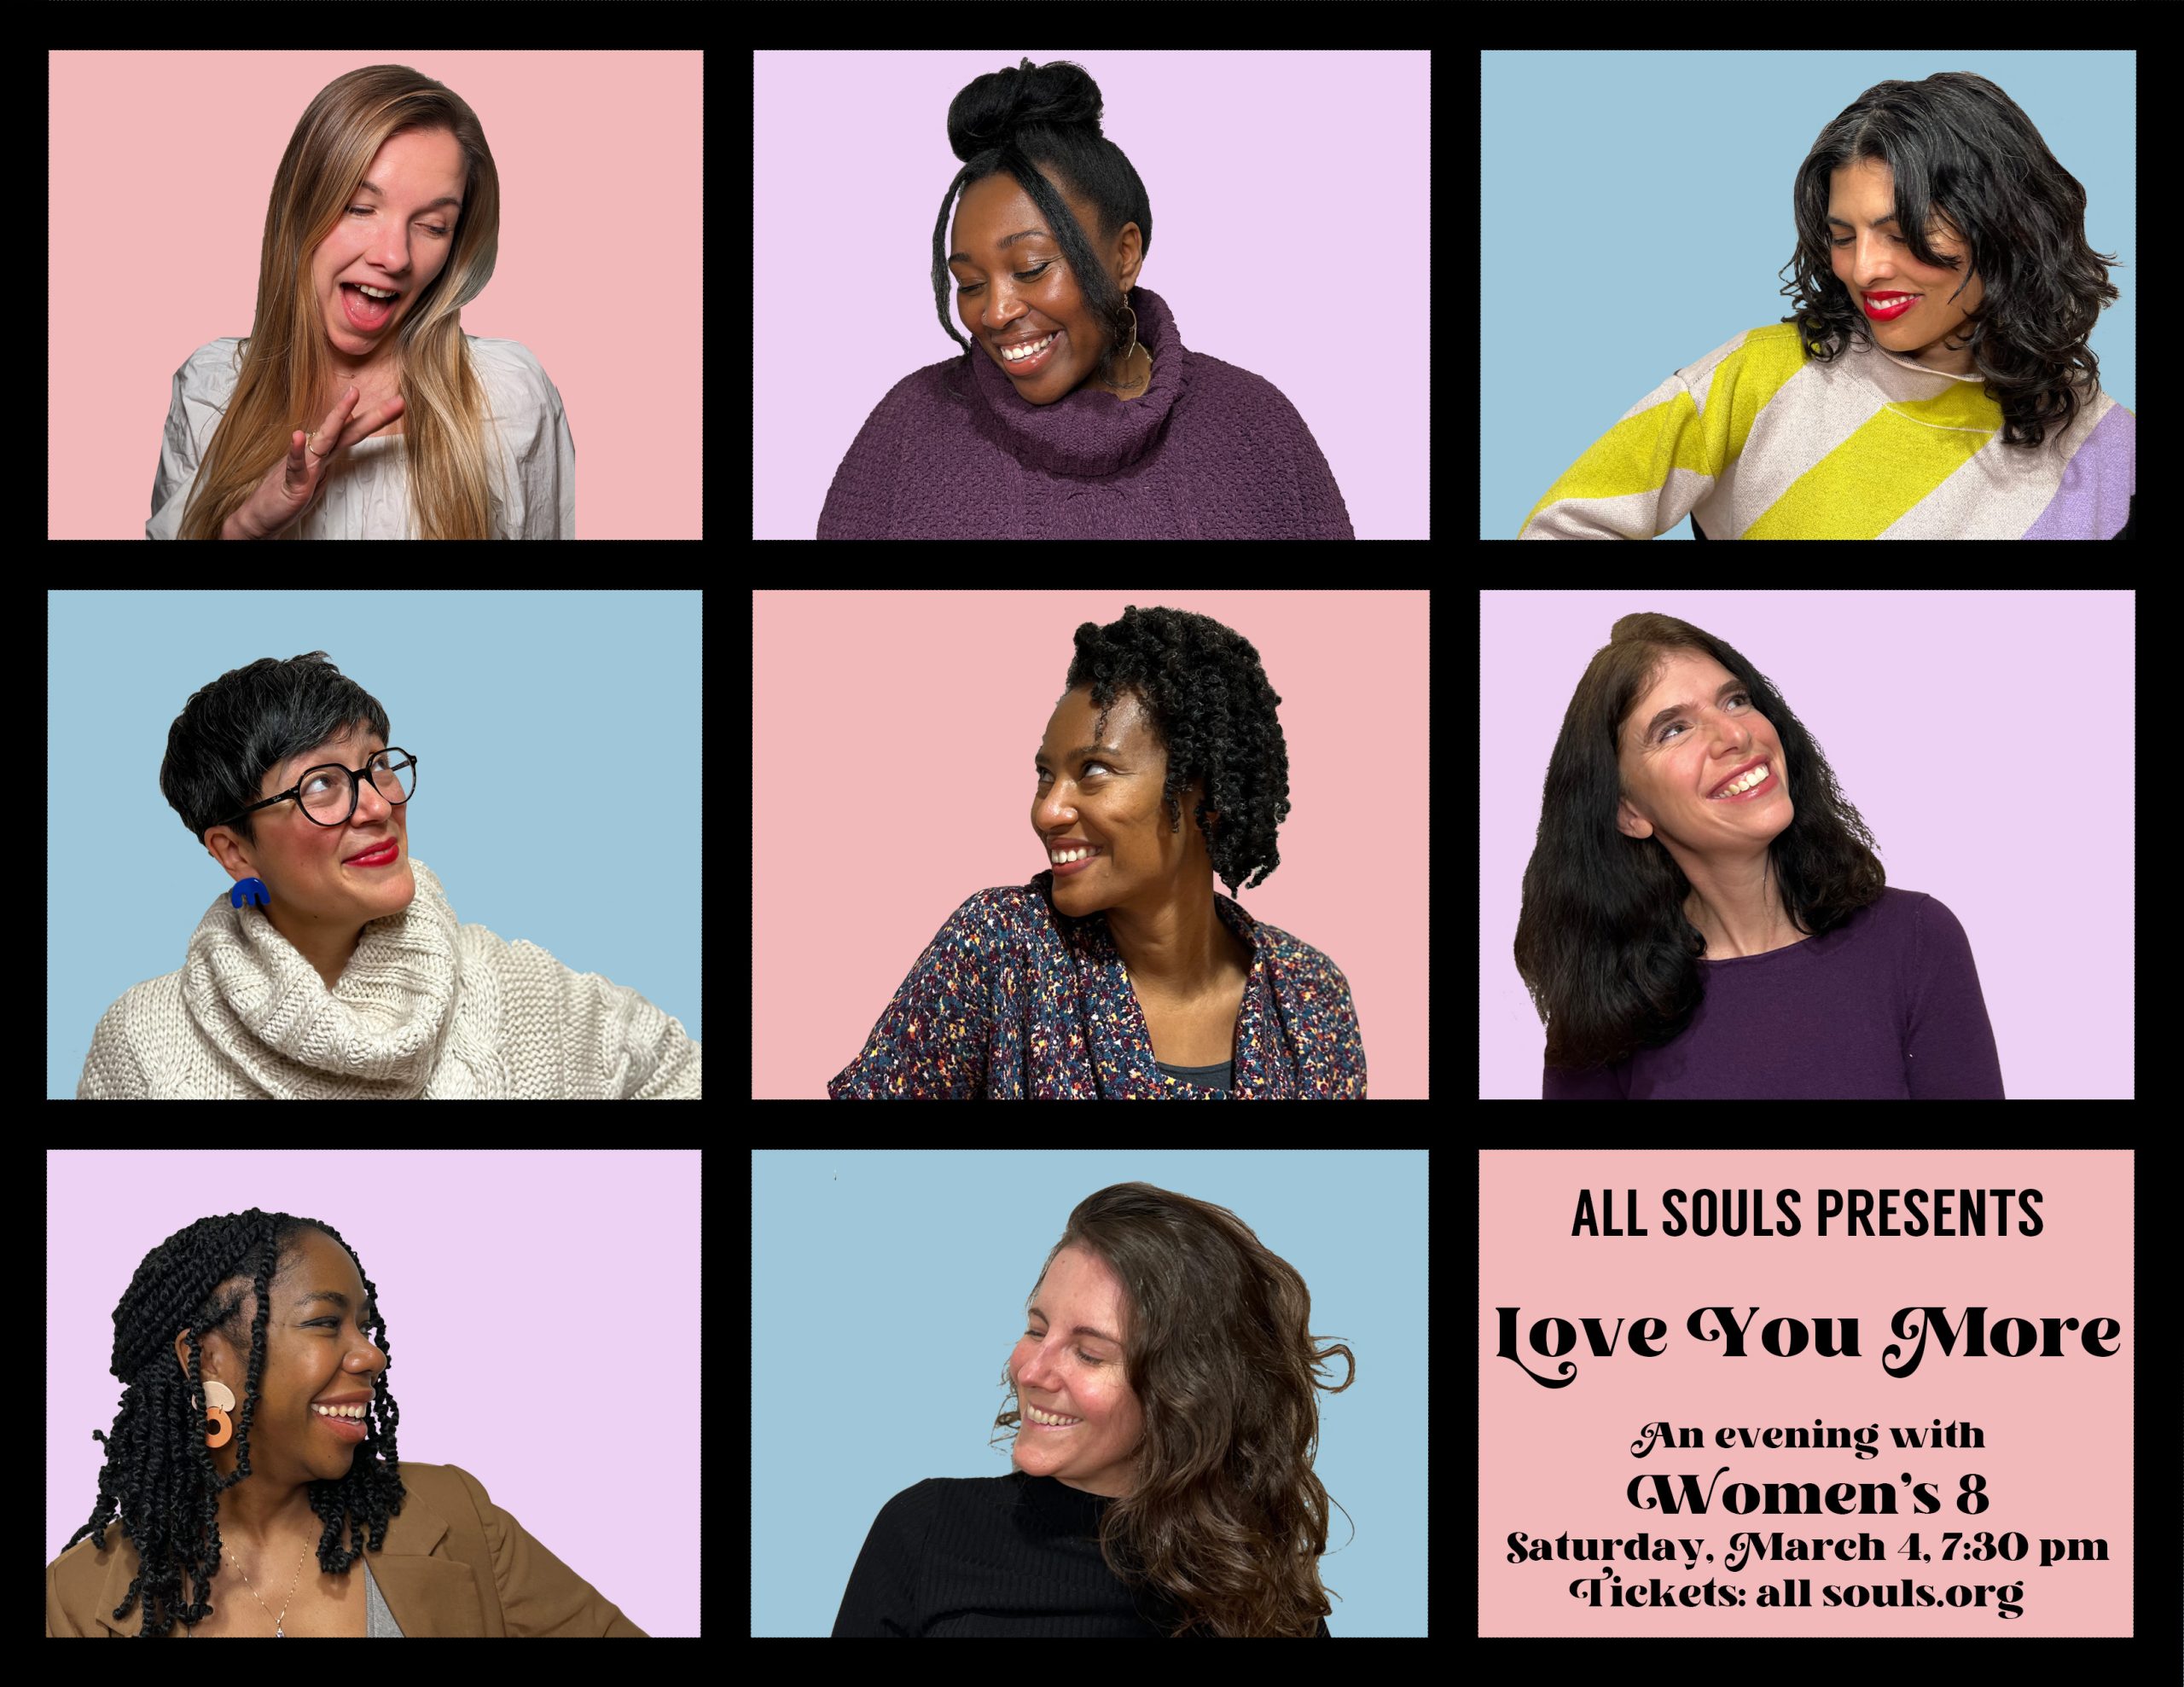 Love You More: an evening with Women's 8